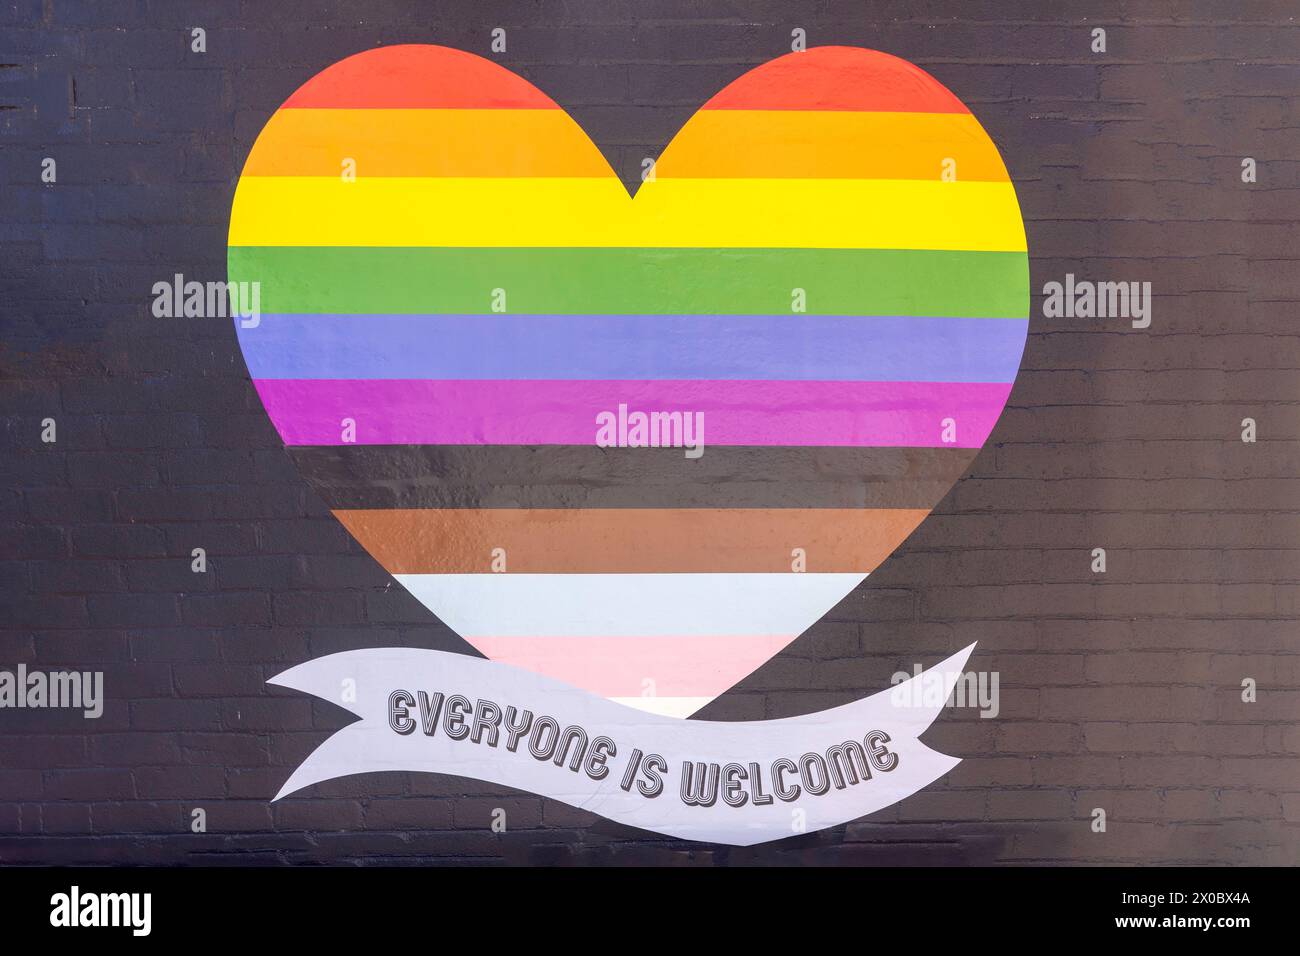 'Everyone is welcome' wall sign, Queen Street, Berry, New South Wales, Australia Stock Photo